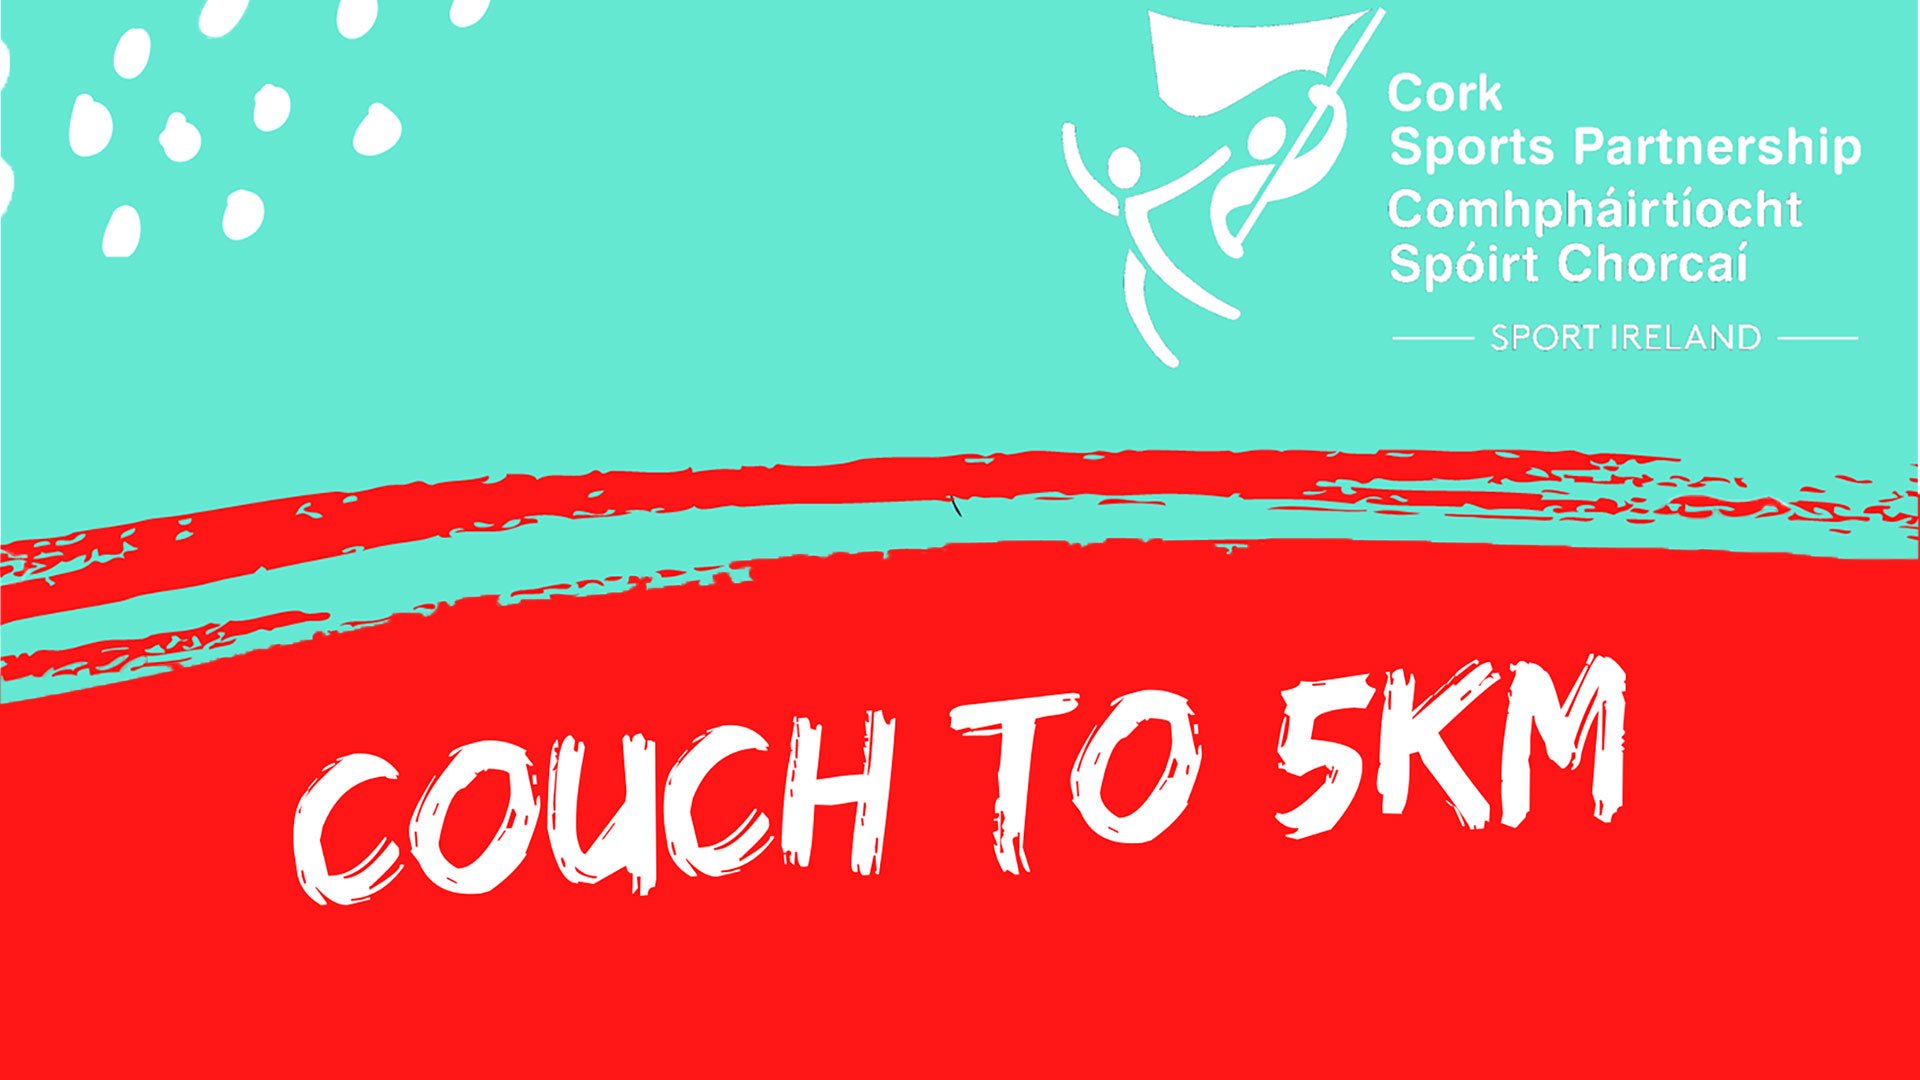 Couch to 5km